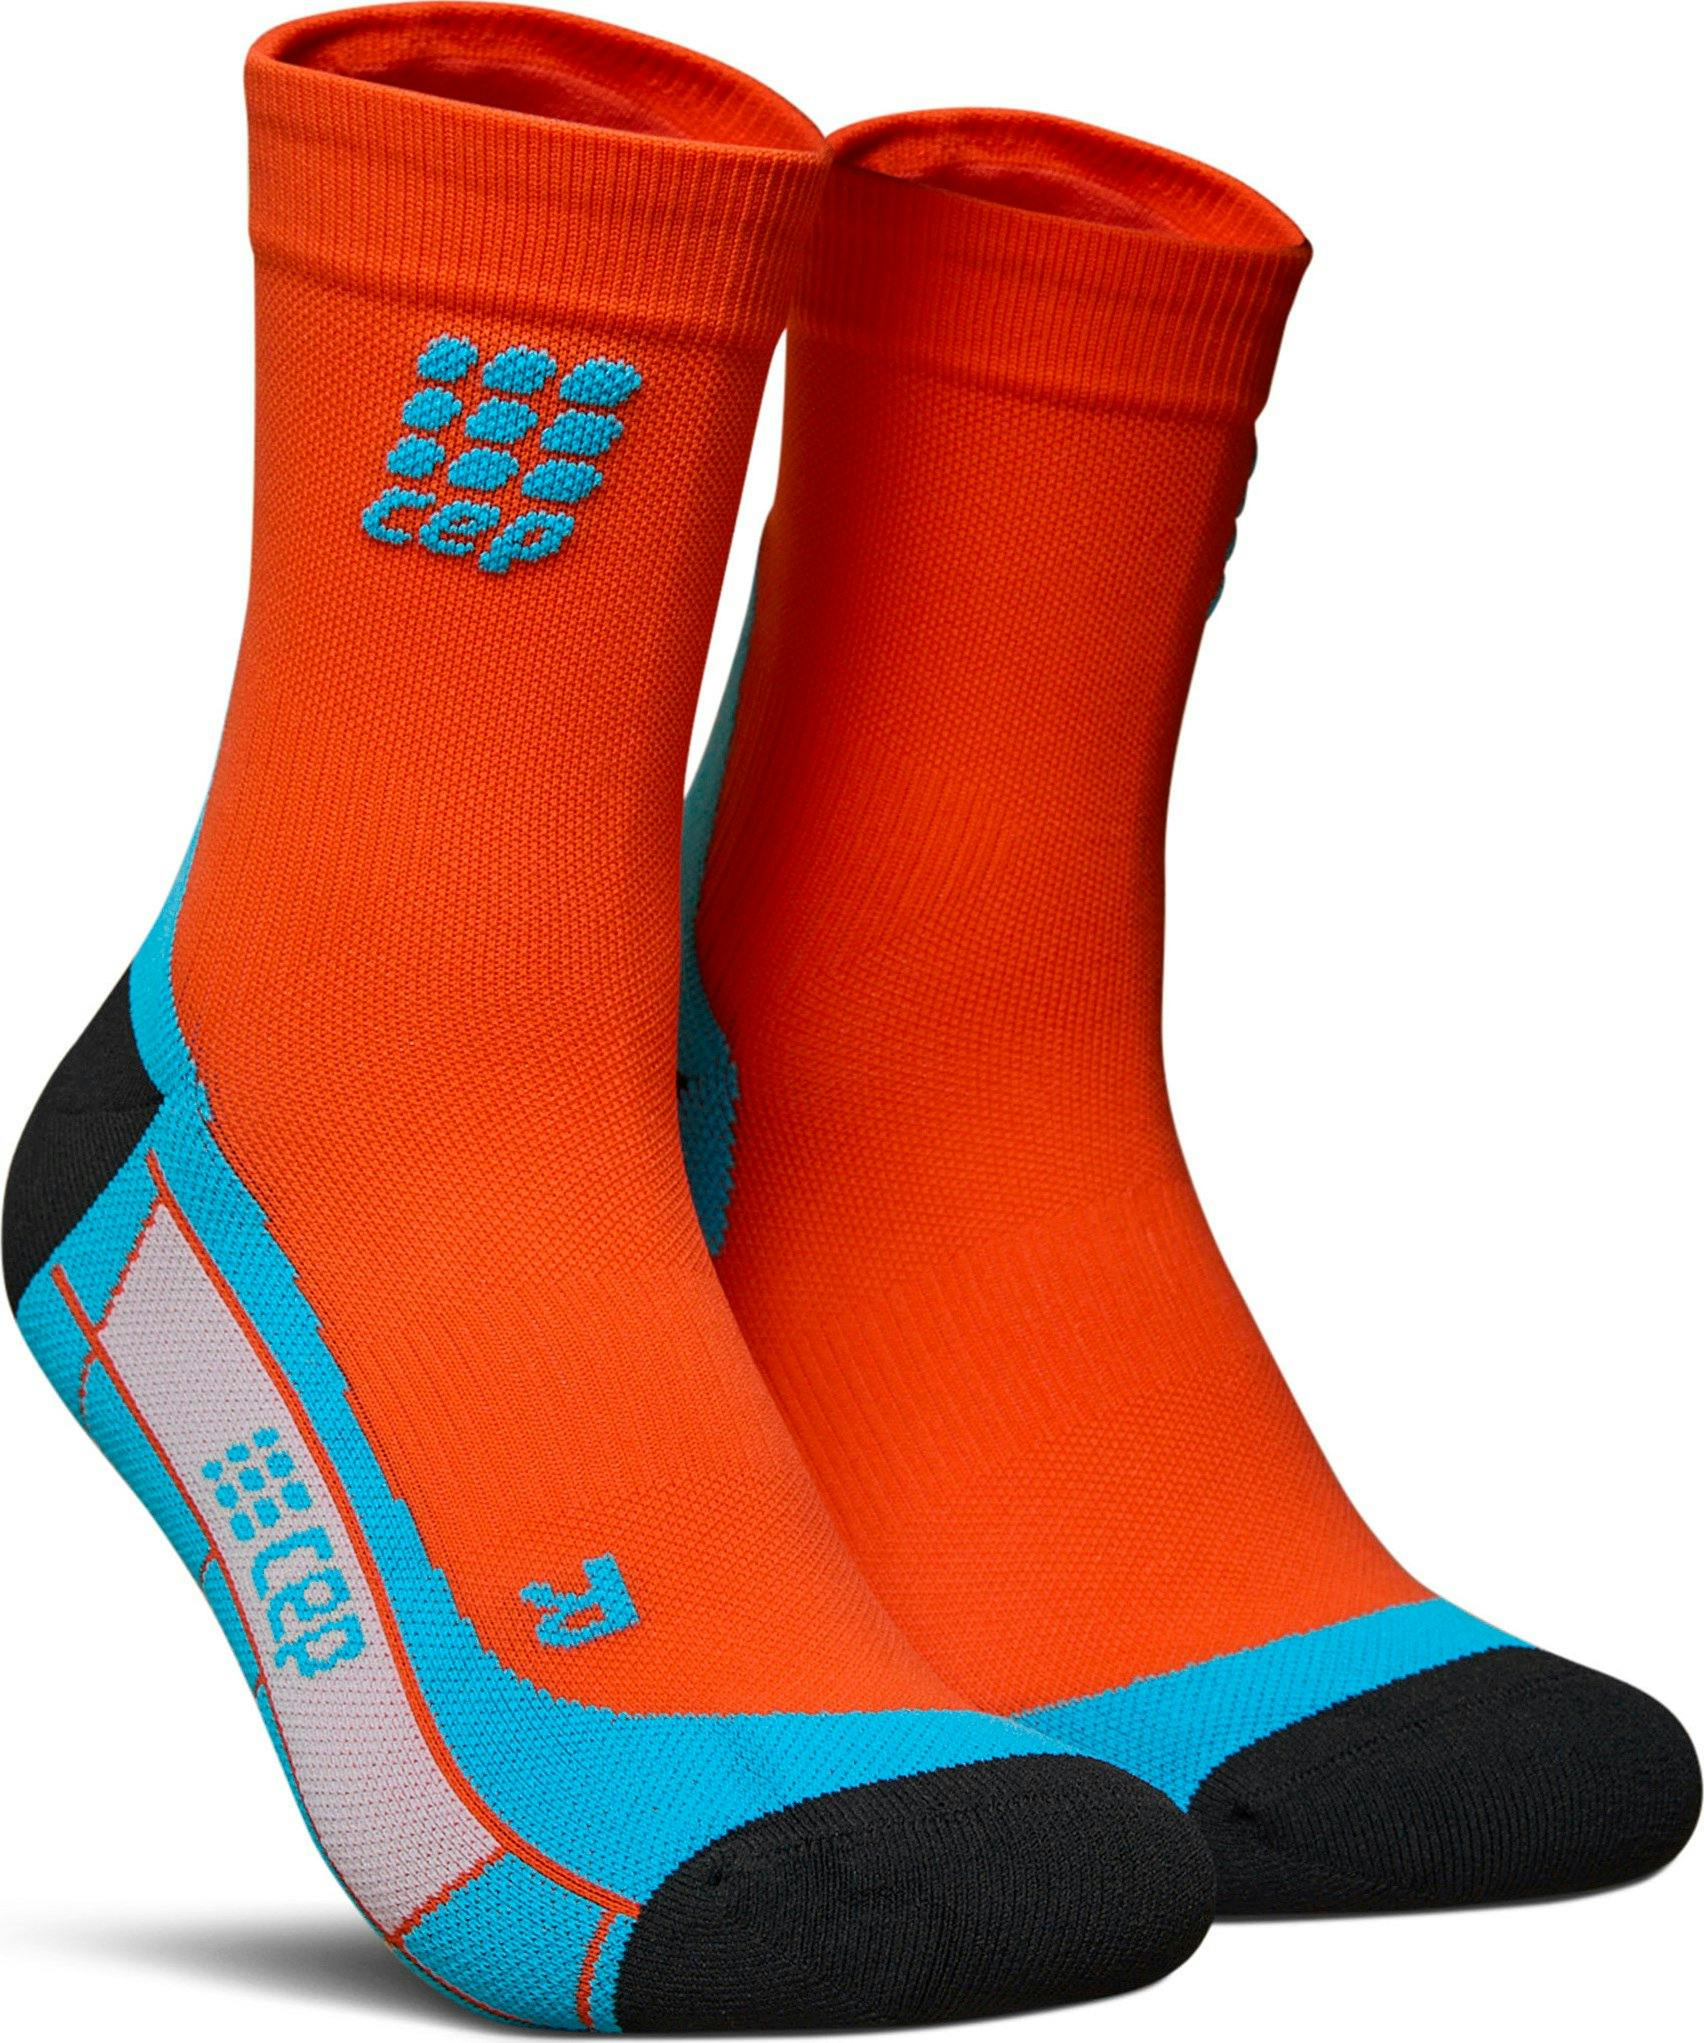 Product image for Dynamic Low-Cut Compression Socks- Men's